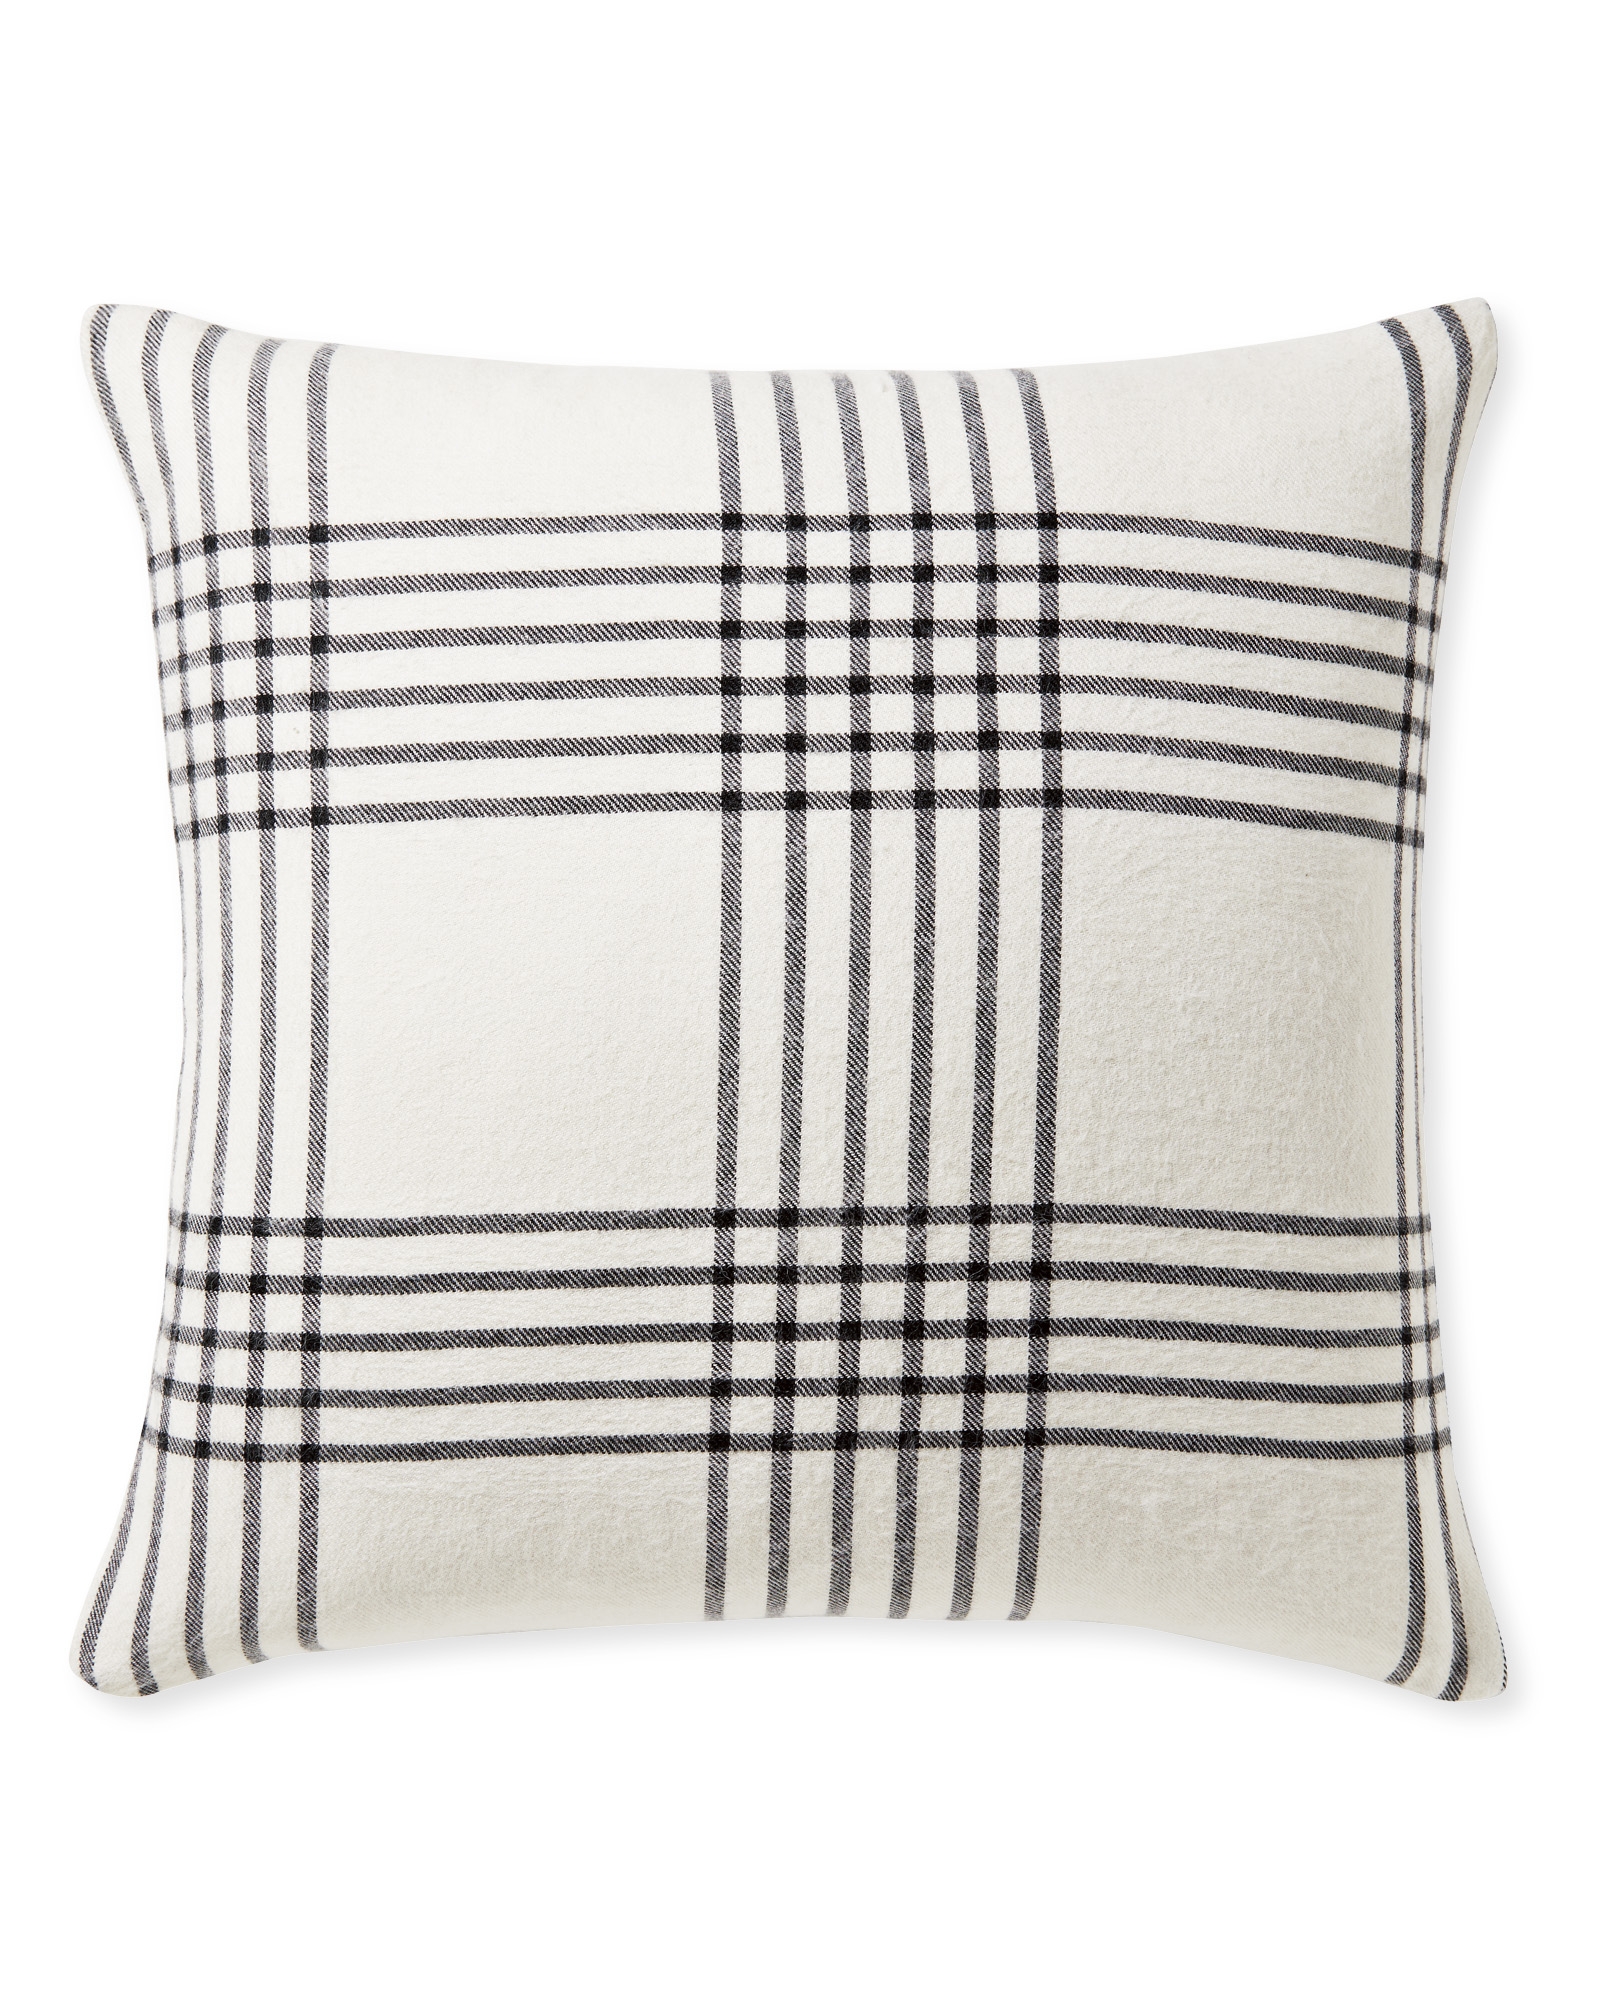 Blakely Plaid Pillow Cover - Image 0